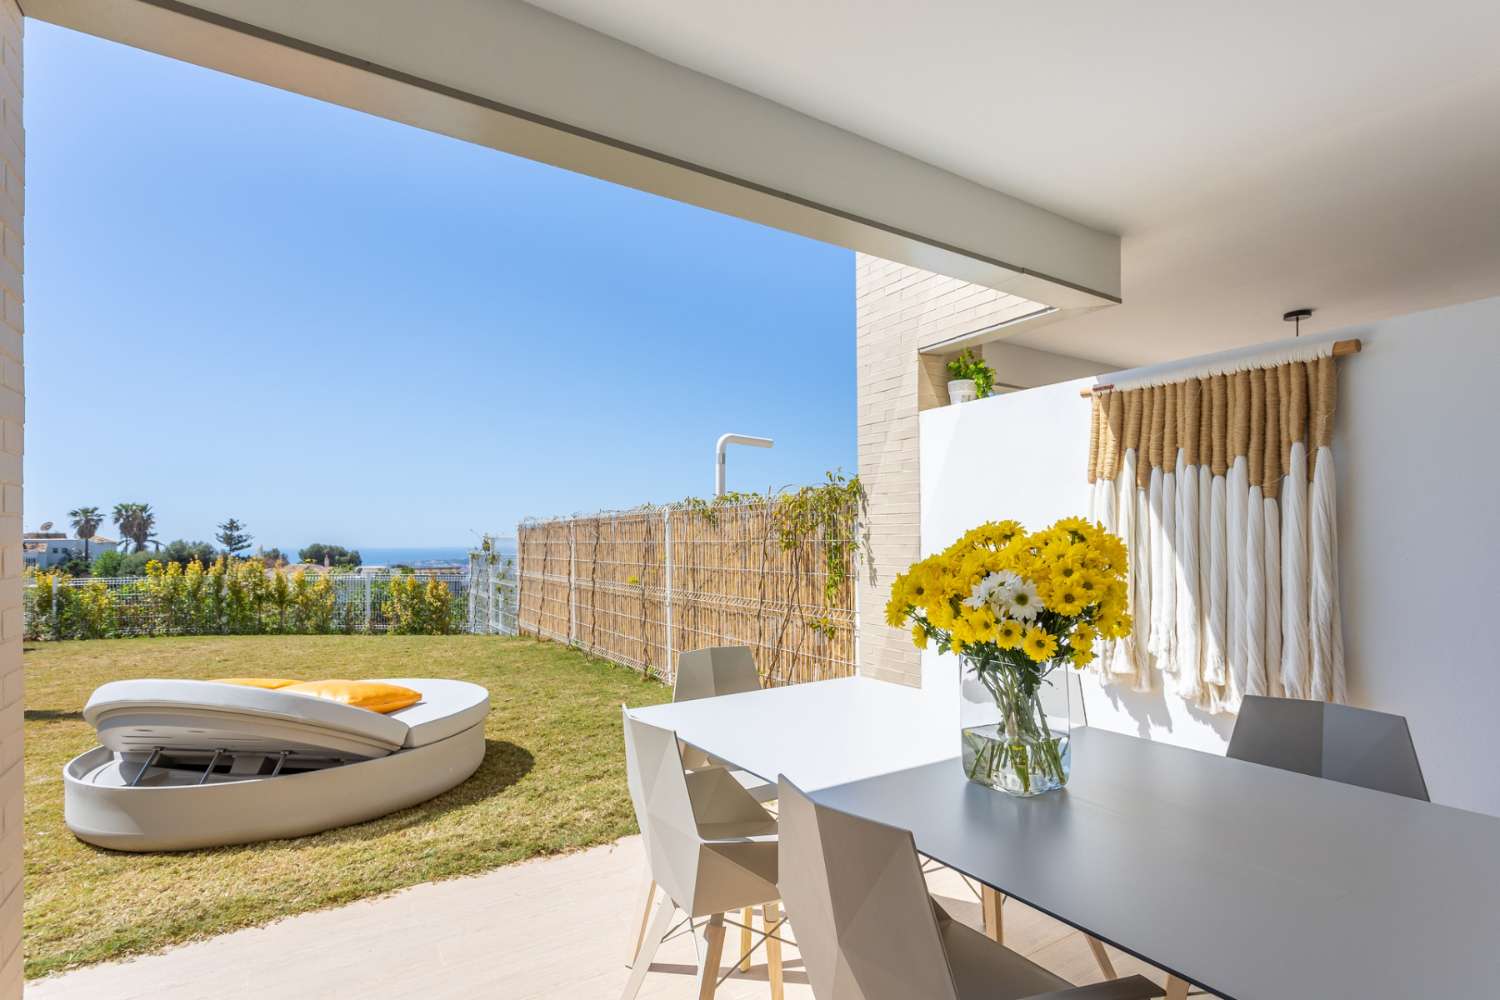 NEW SEMI-DETACHED CHALETS SURROUNDED BY NATURE WITH SEA VIEWS